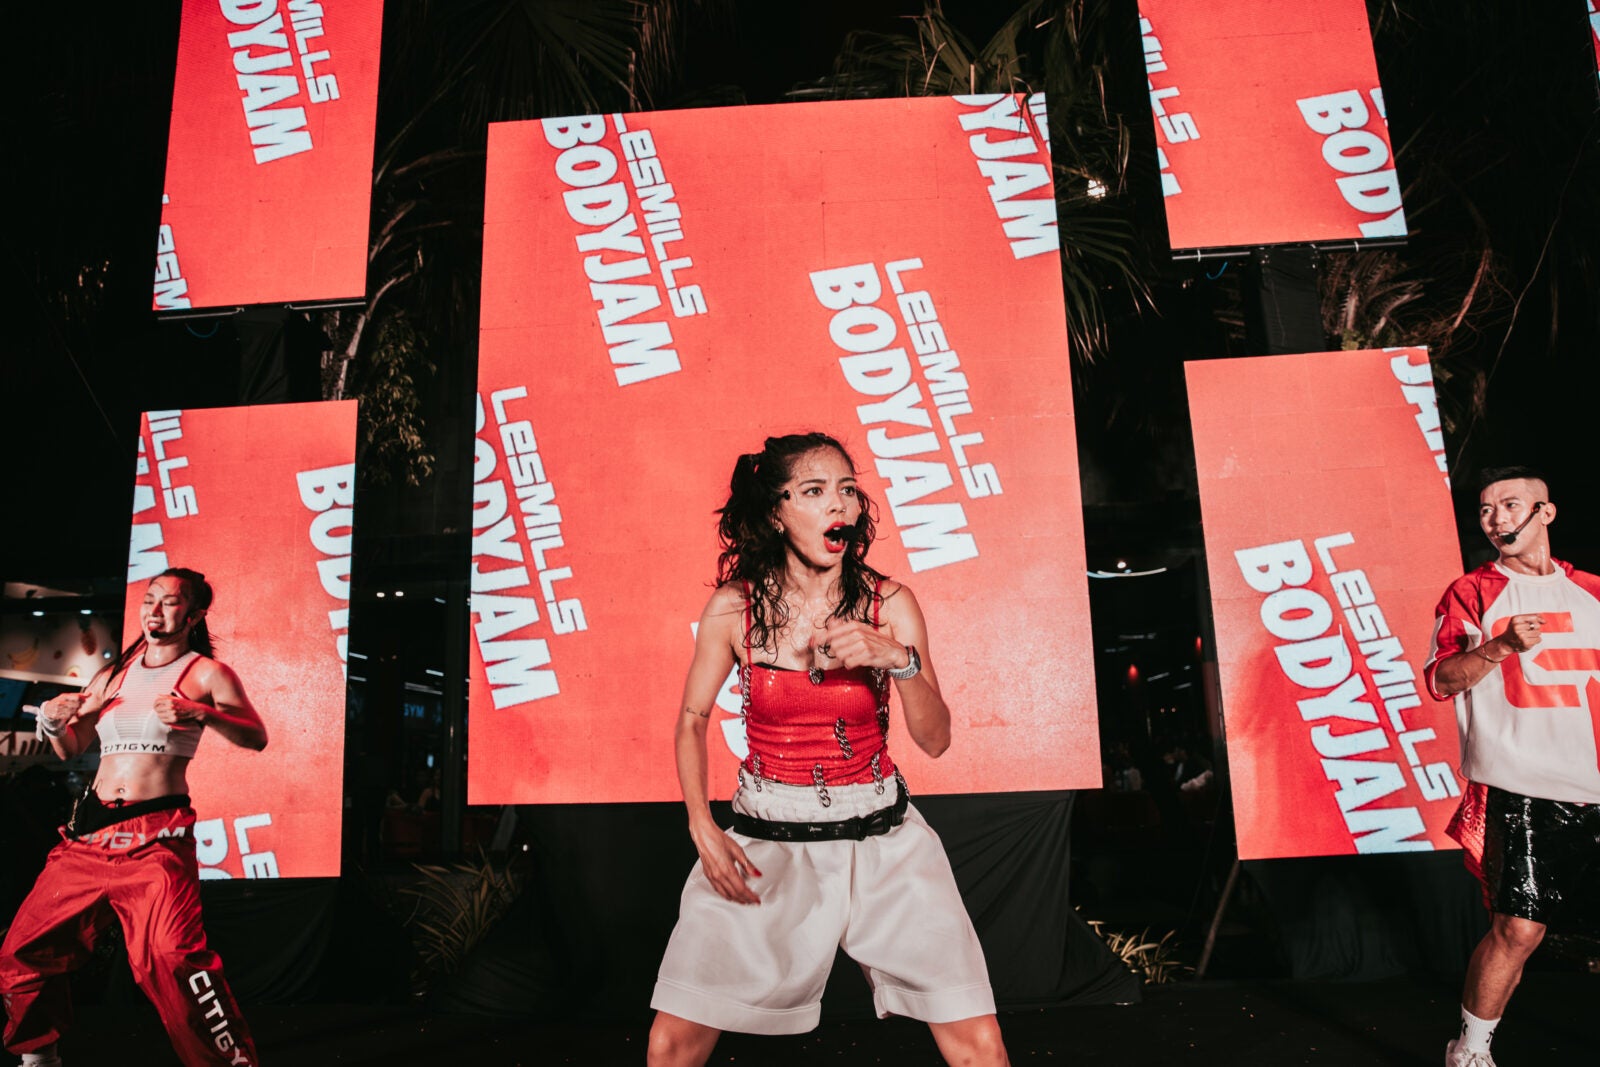 A Young Energised Asian Woman In White Shorts And Red Tank Stands In The Middle Of A Stage While Talking Through A Microphone Attachment. Behind Her Are Two Other Fitness Instructors Mirroring Her And The Company'S Branding &Quot;Les Mills Bodyjam&Quot; Printed In The Background.